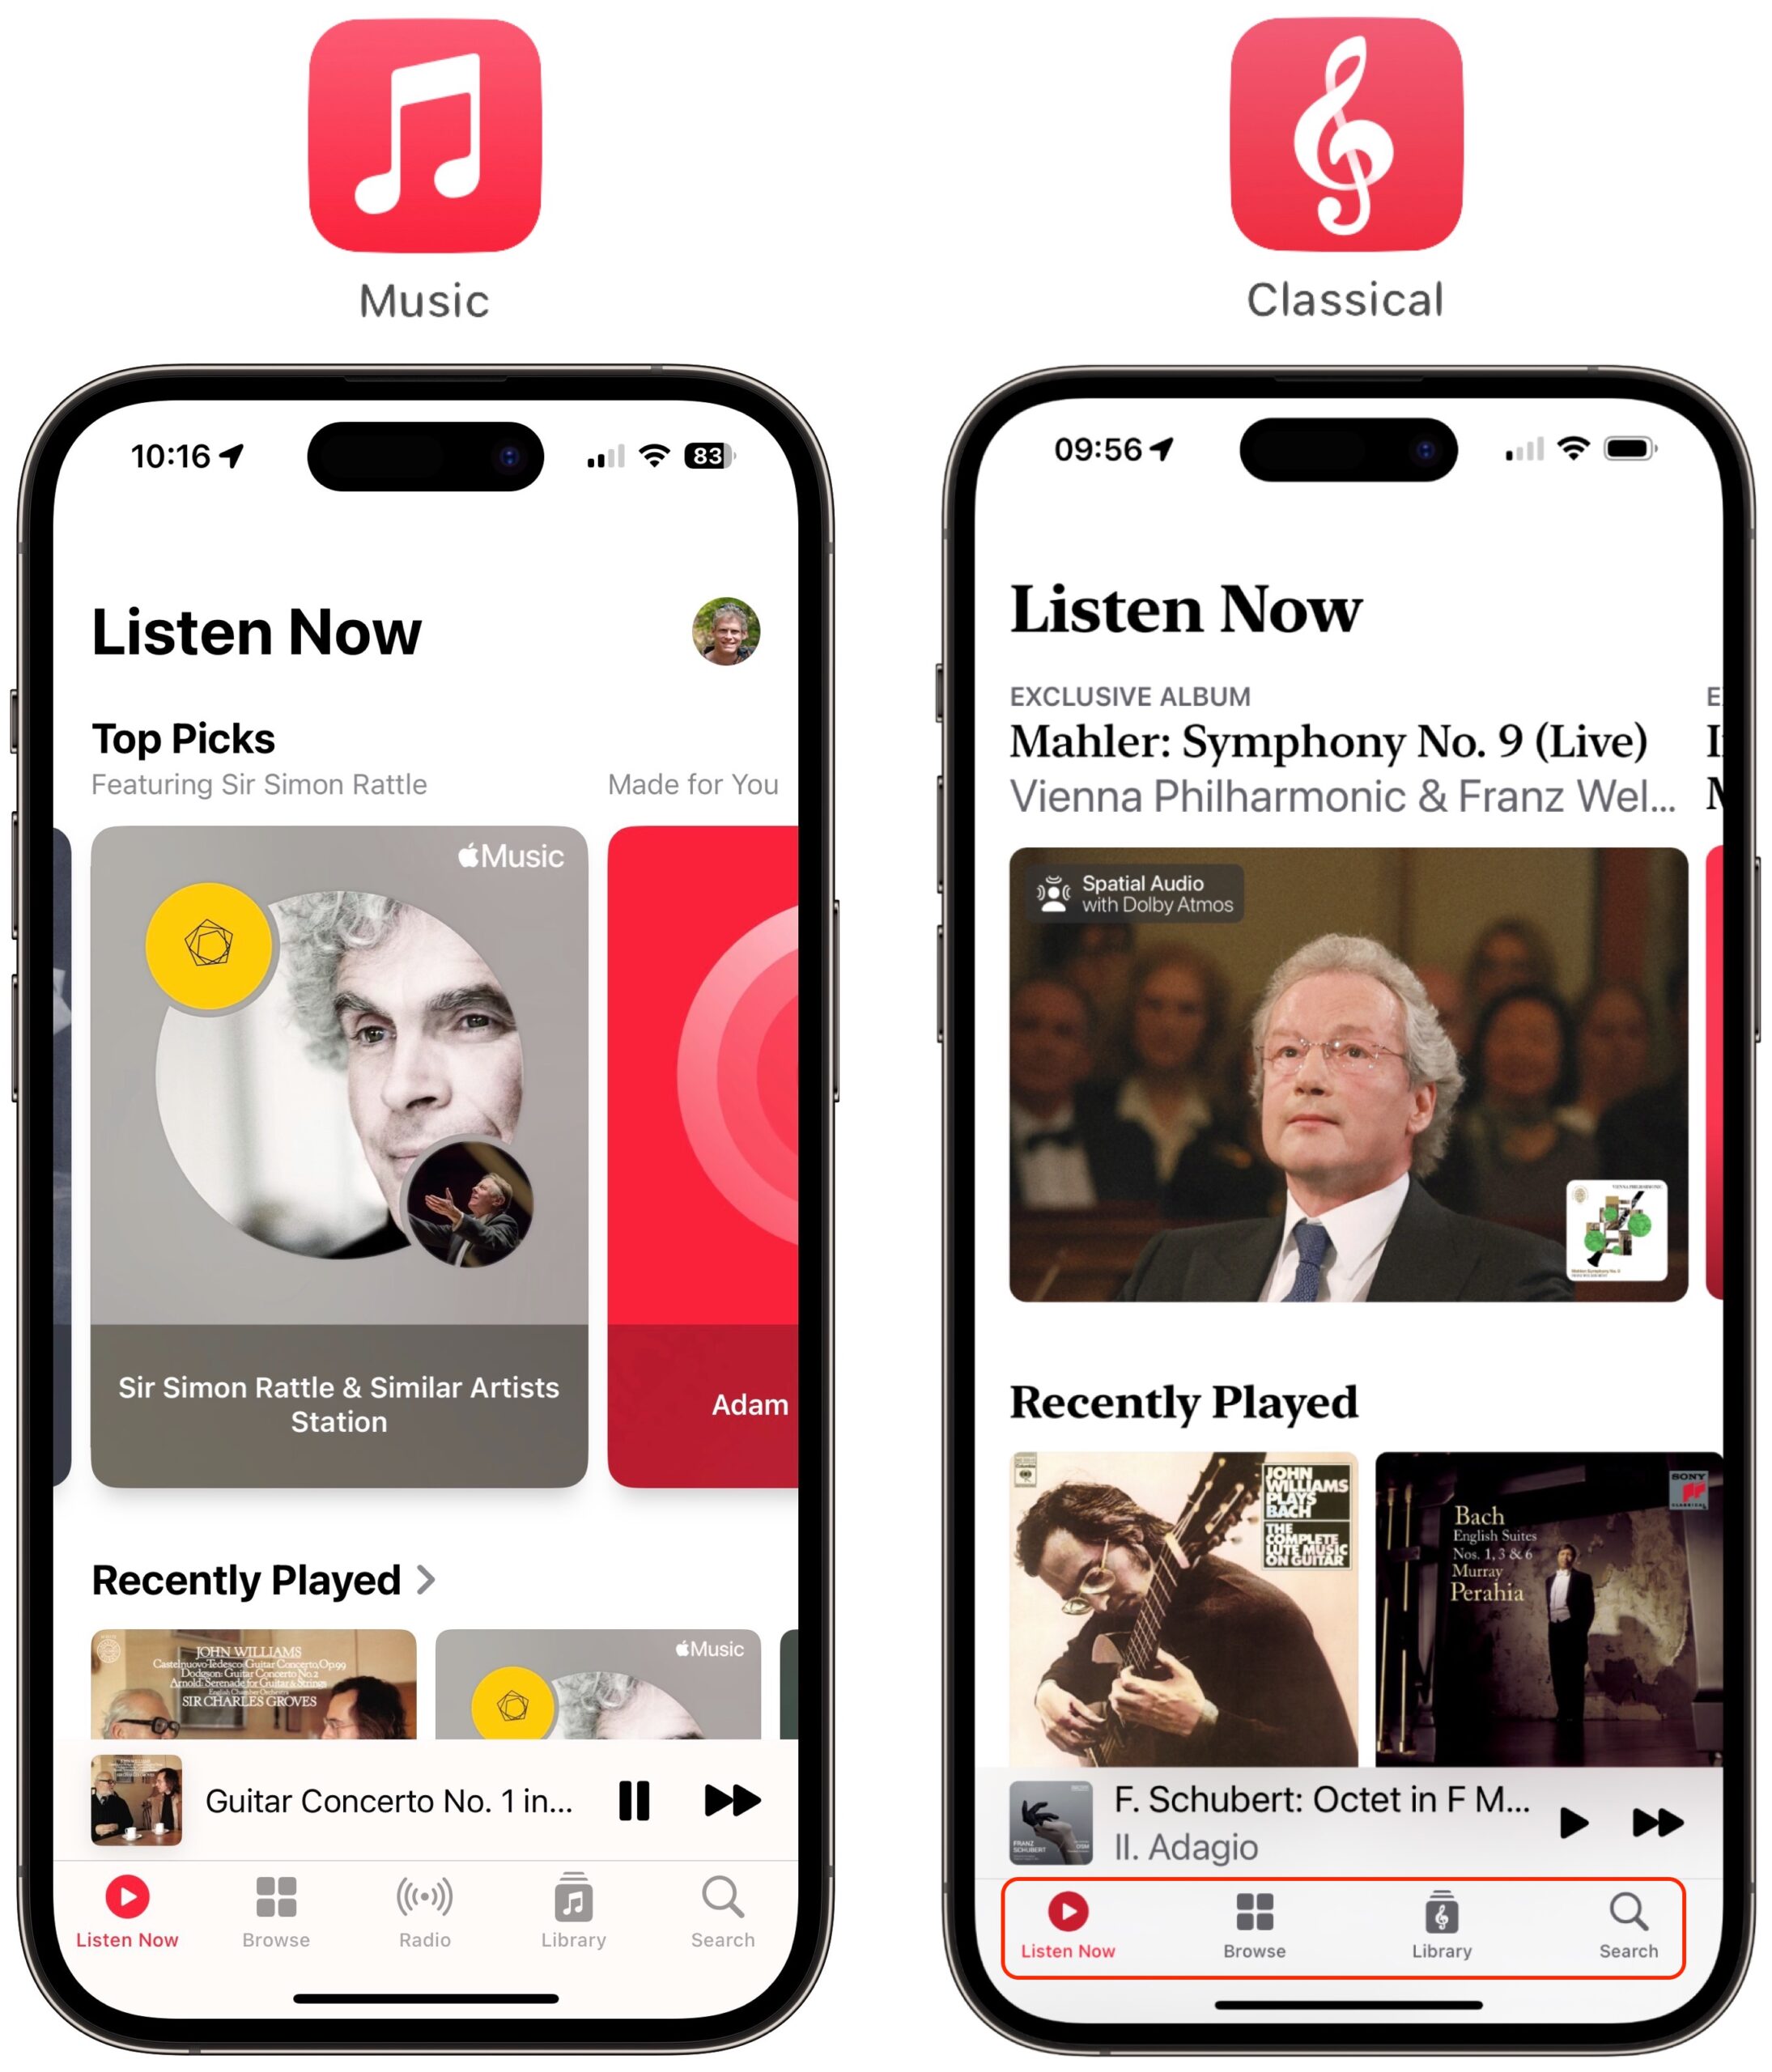 Listen Now comparison between Apple Music and Apple Music Classical